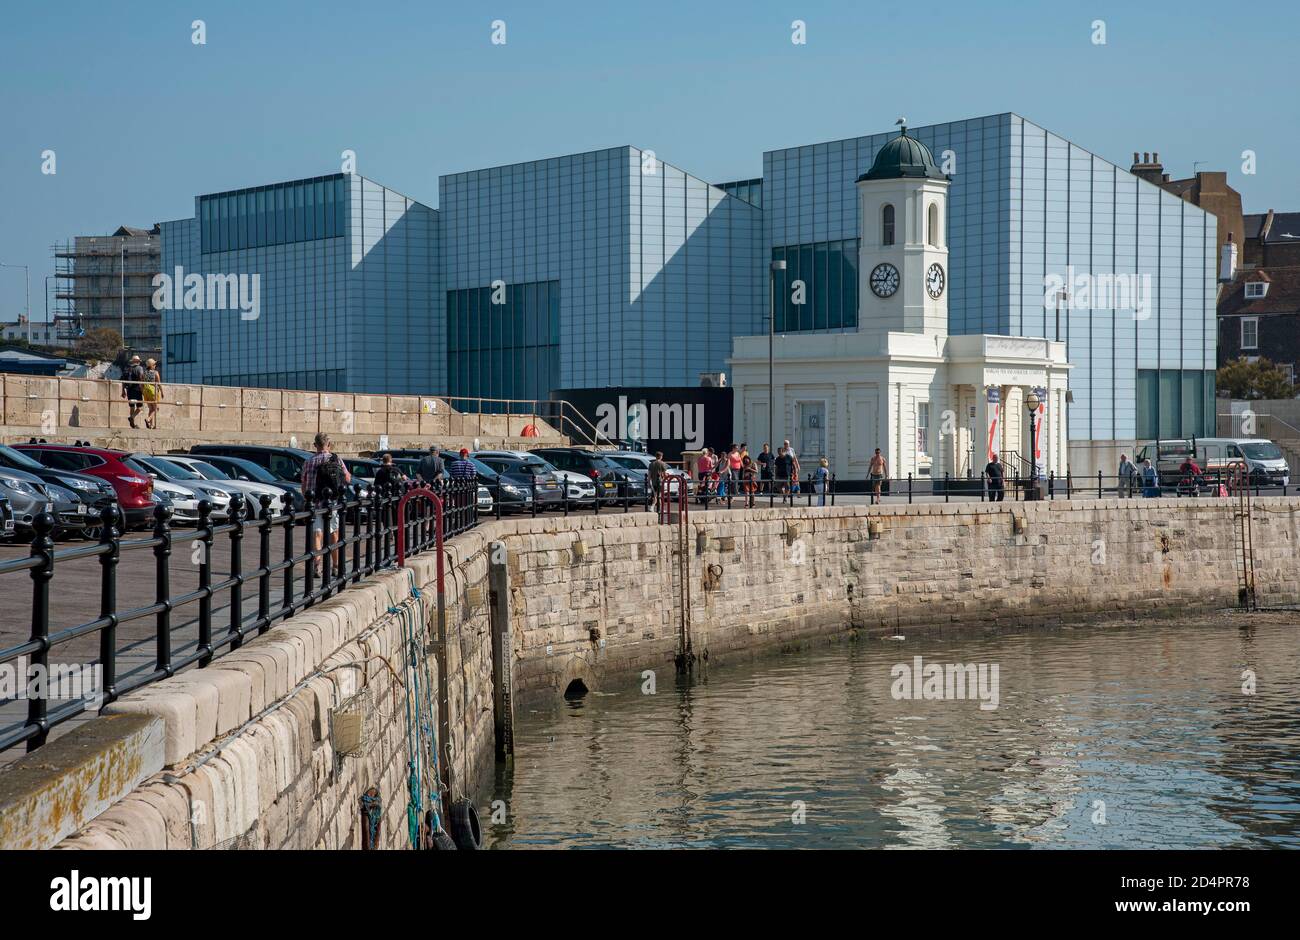 Margate, Kent, England,UK. 2020. Margate a seaside town. The tourist Information office and Turner Contemporary Building overlooking the harbour. Stock Photo